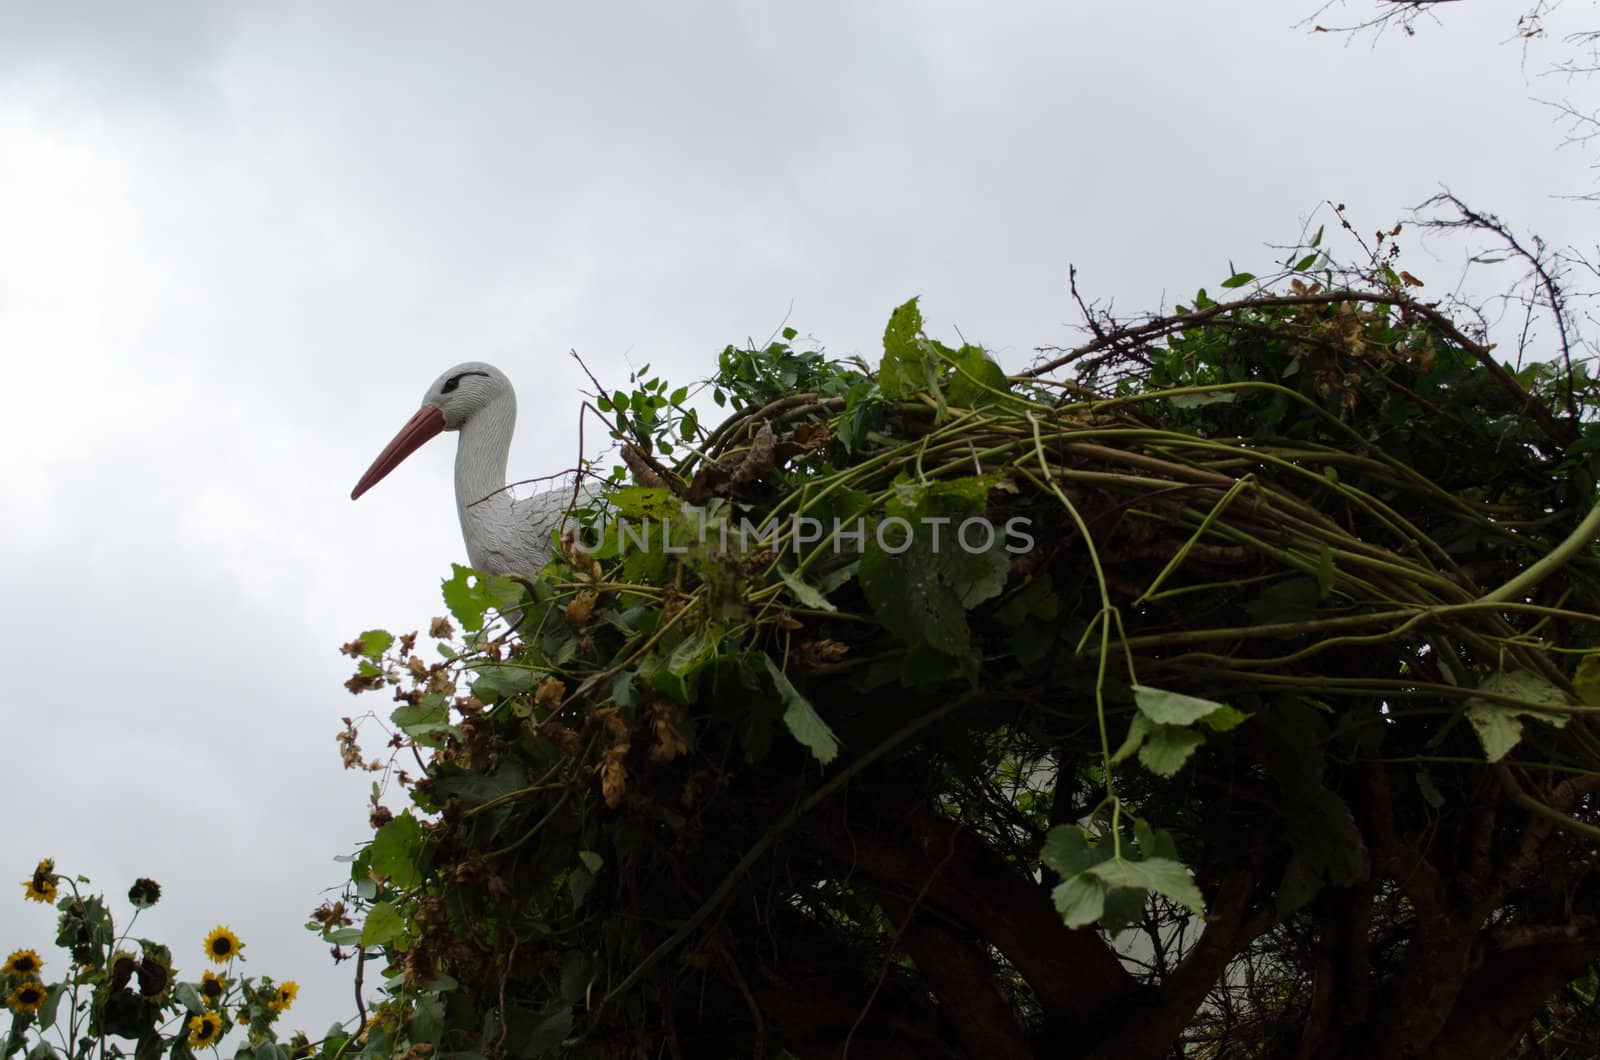 decorative plastic stork sit in handmade nest from creeper plants on background of cloudy sky.